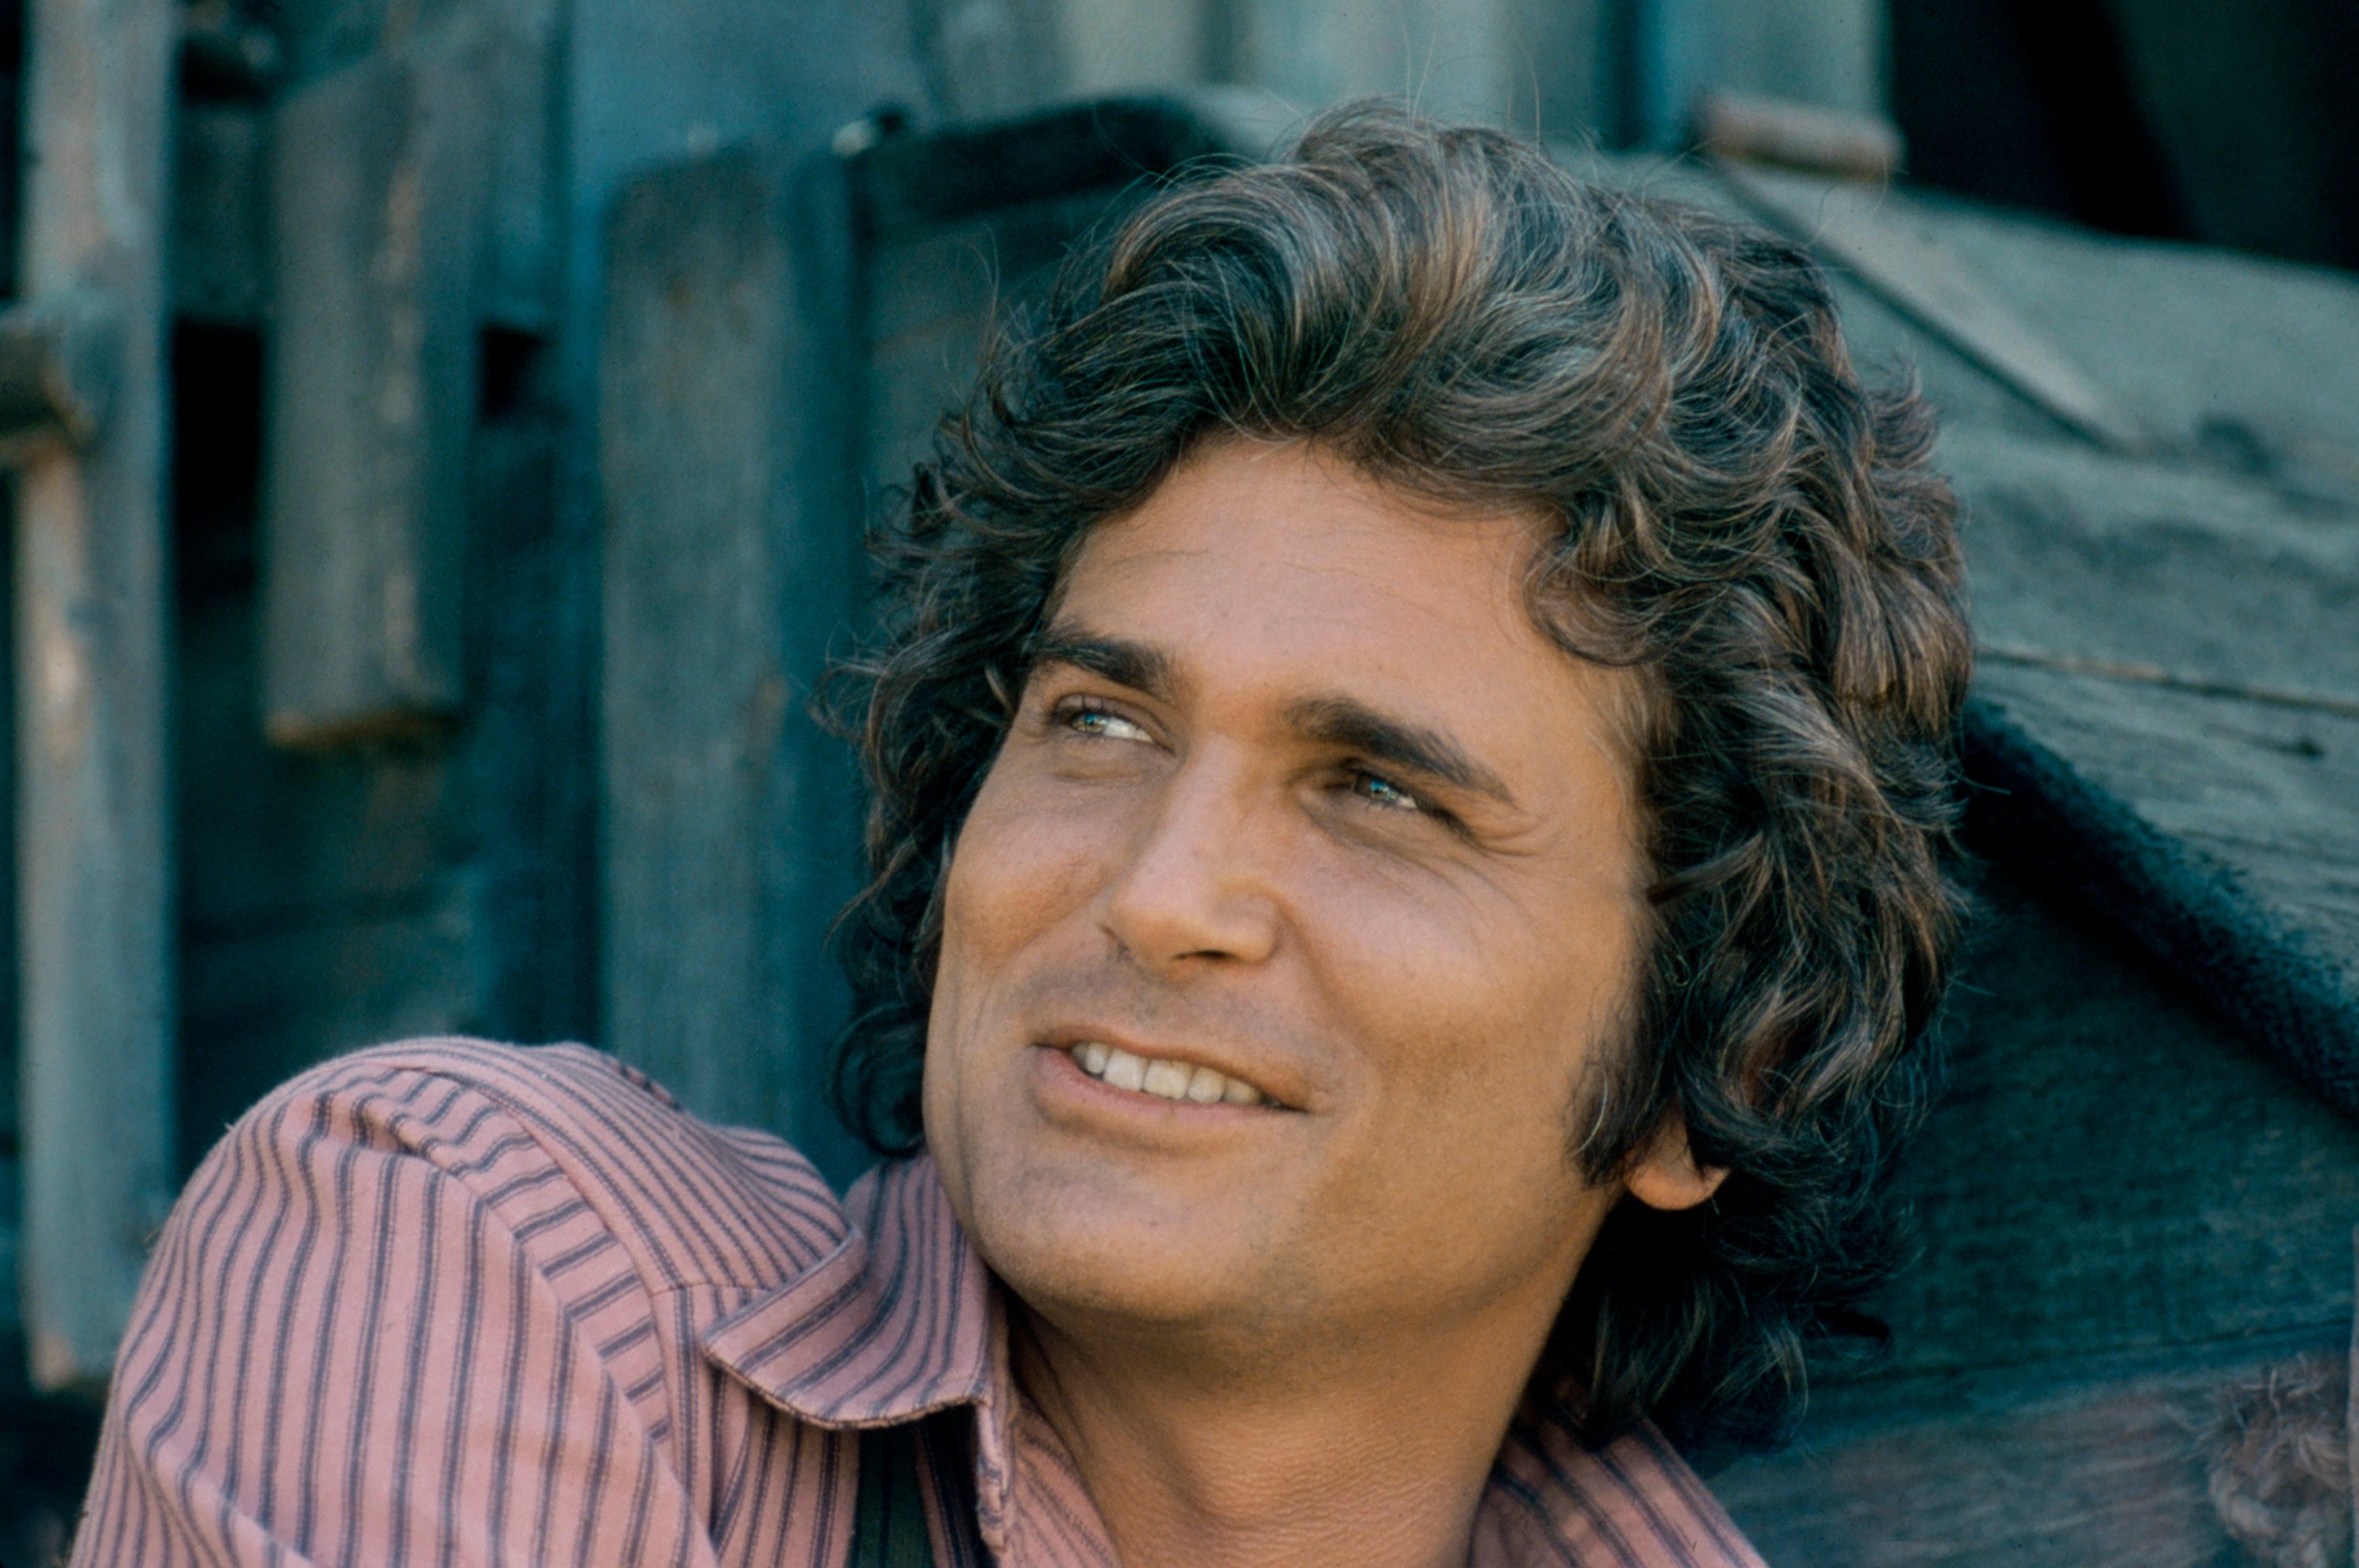 Michael Landon poses on the set of Little House on the Prairie